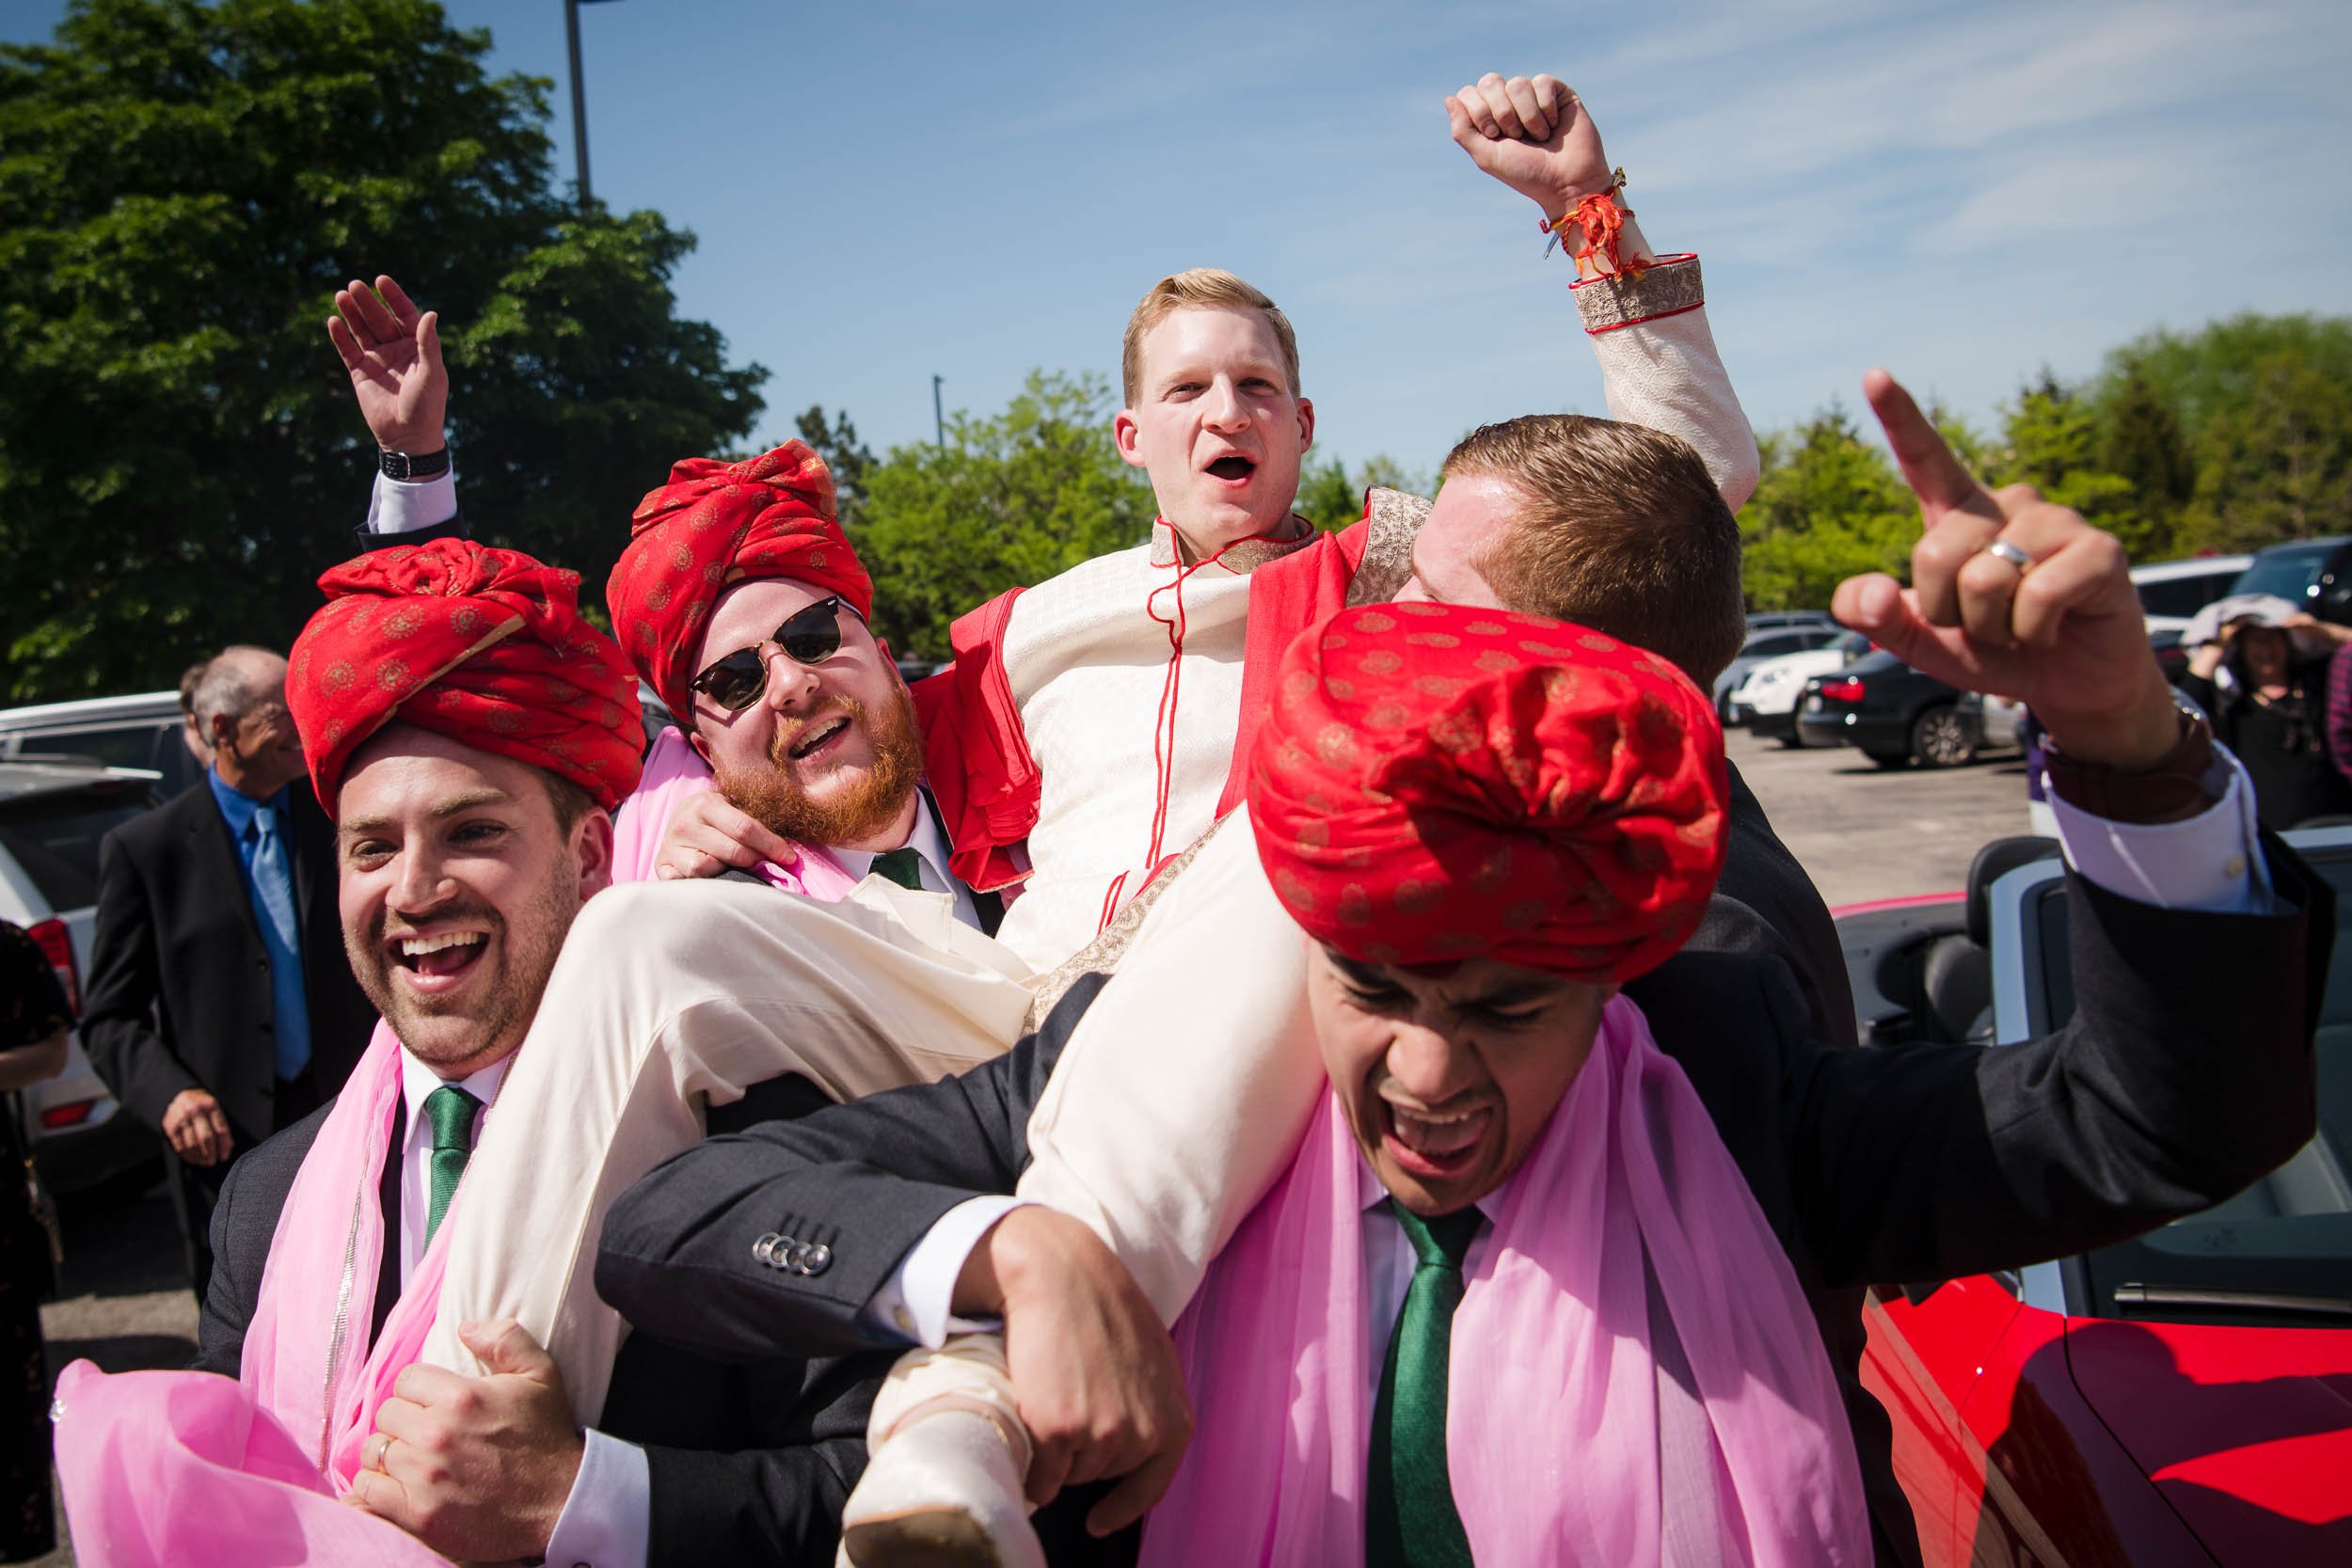 Chicago Wedding Photographer | Renaissance Schaumburg | J. Brown Photography | groom is carried during the baraat.